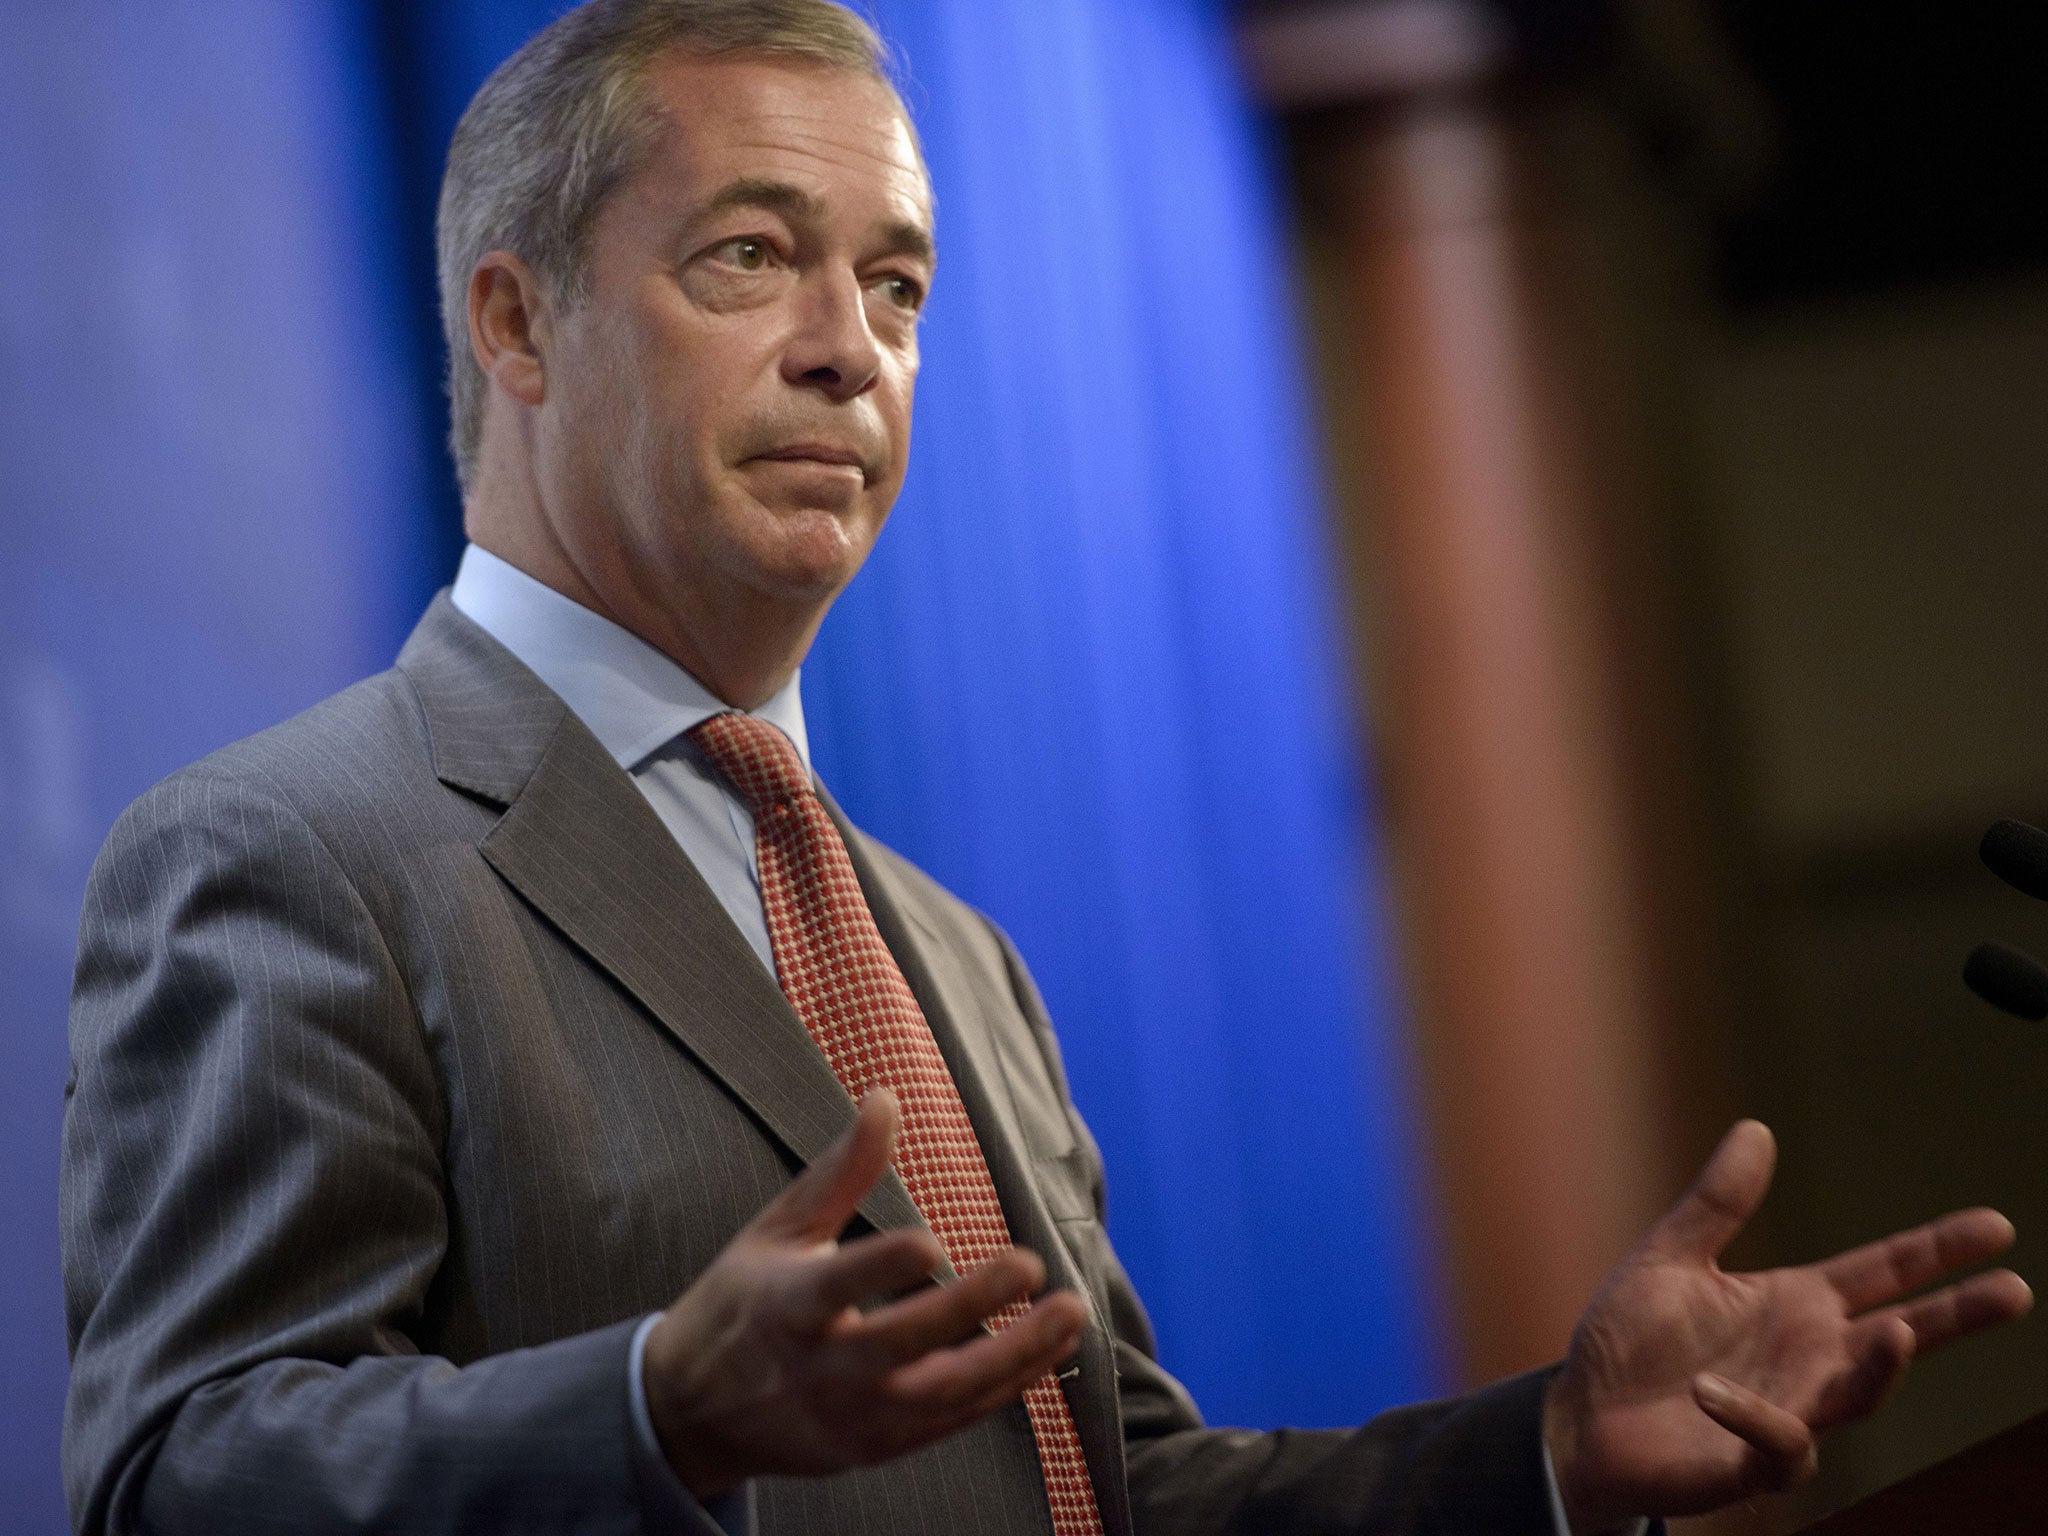 Nigel Farage said he would not have shot Cecil